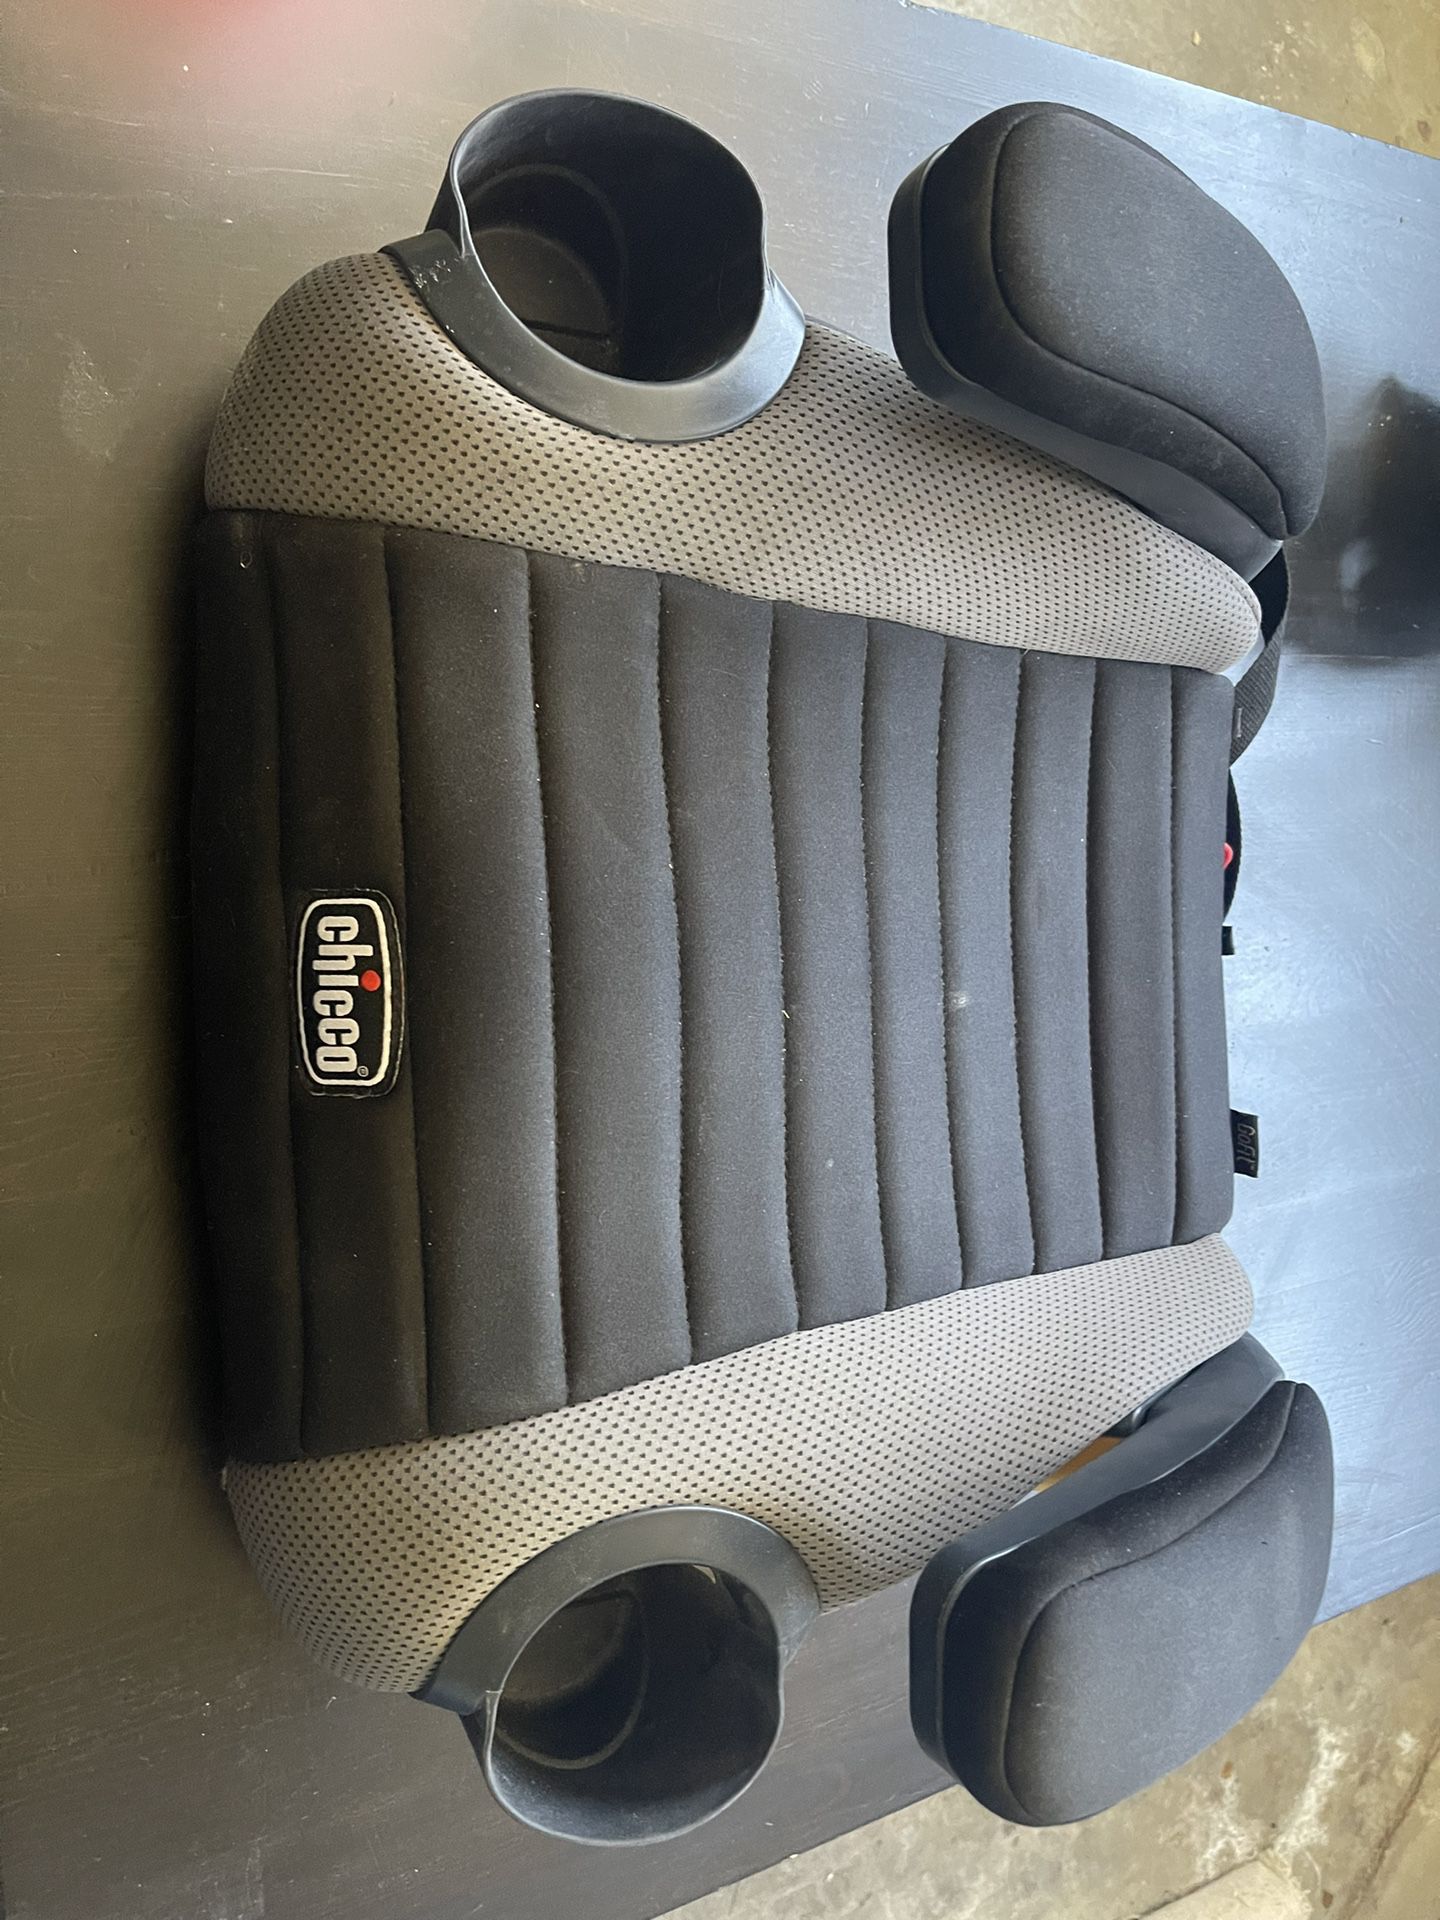 Chico Booster Car seat